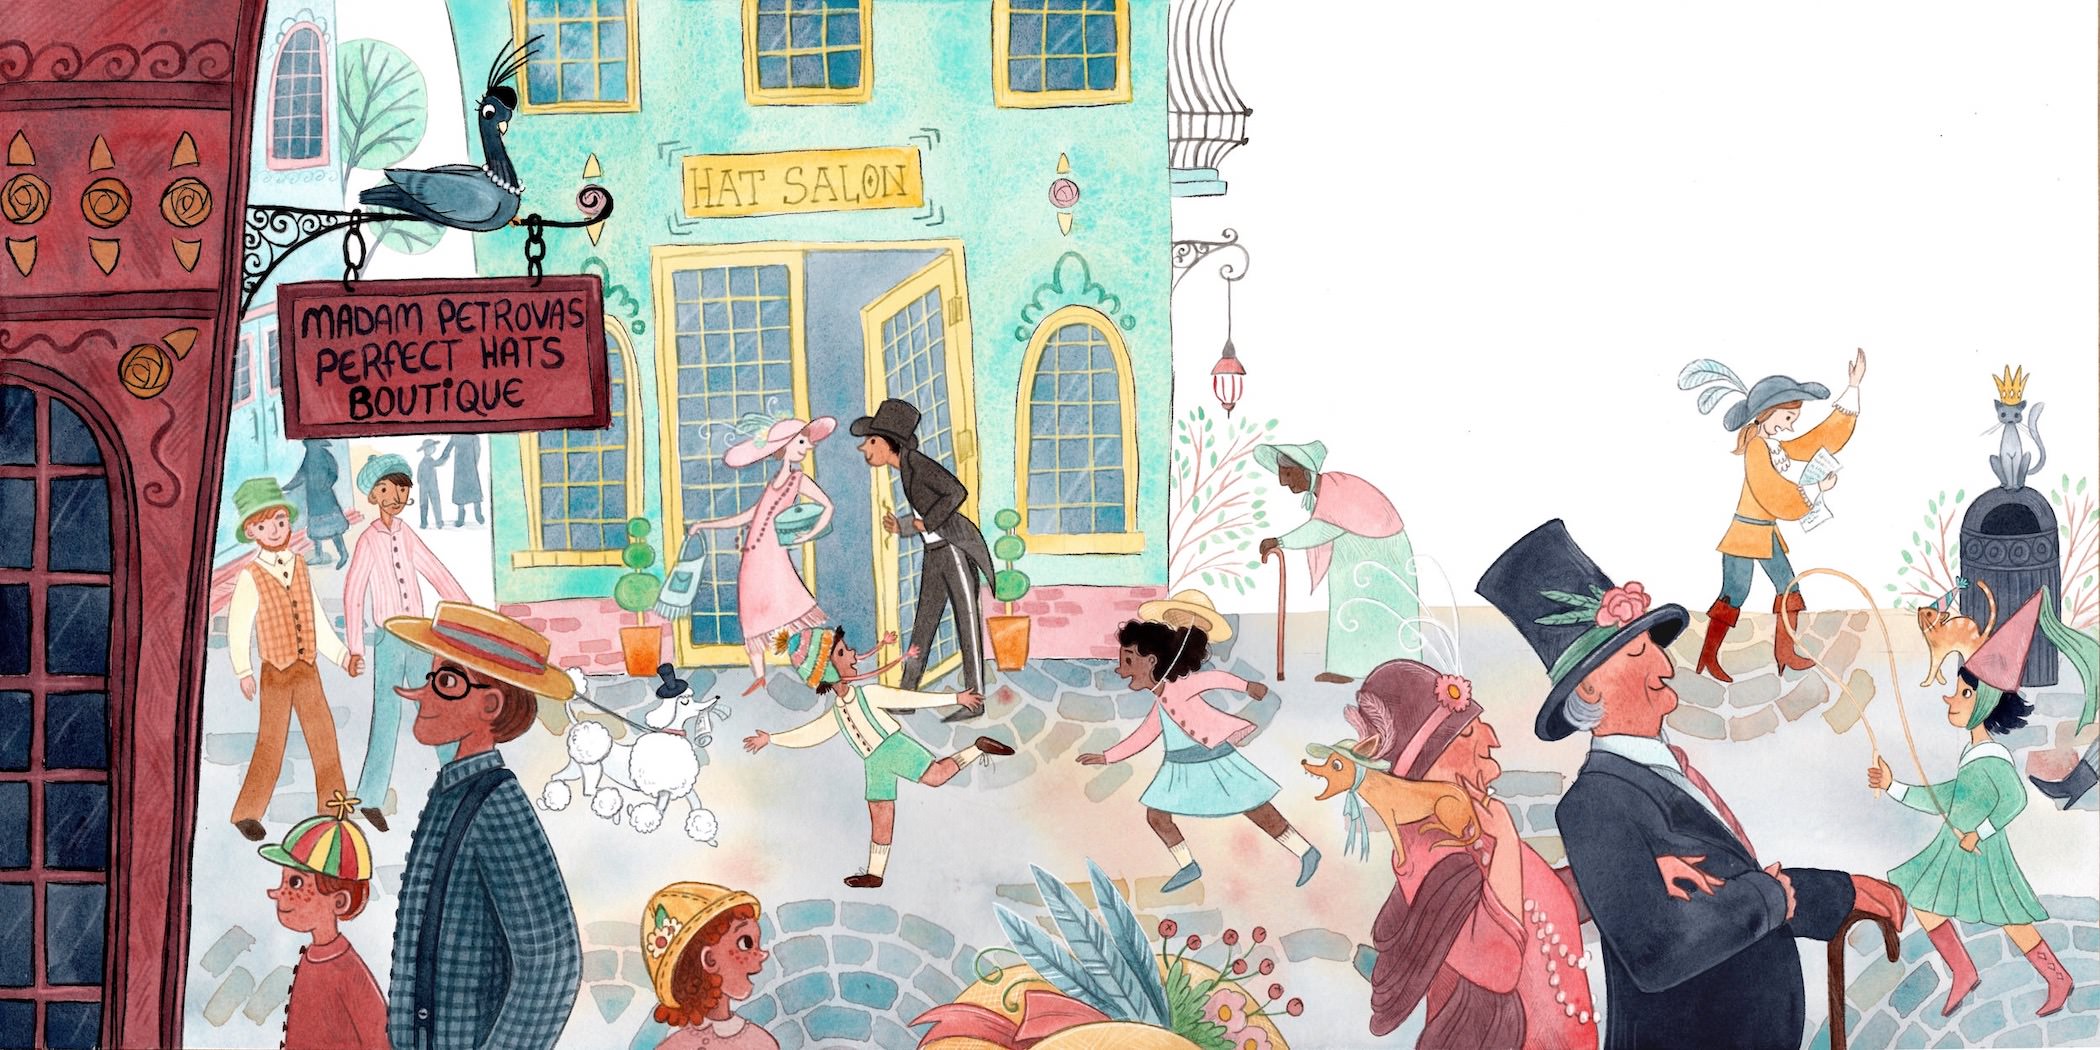 Whimsical double page spread picture book illustration of a busy city street with colorful buildings, and people all wearing hats and dressed in old fashioned clothes coming and going on it. A pigeon wearing a hat is perched above a sign in the foreground.